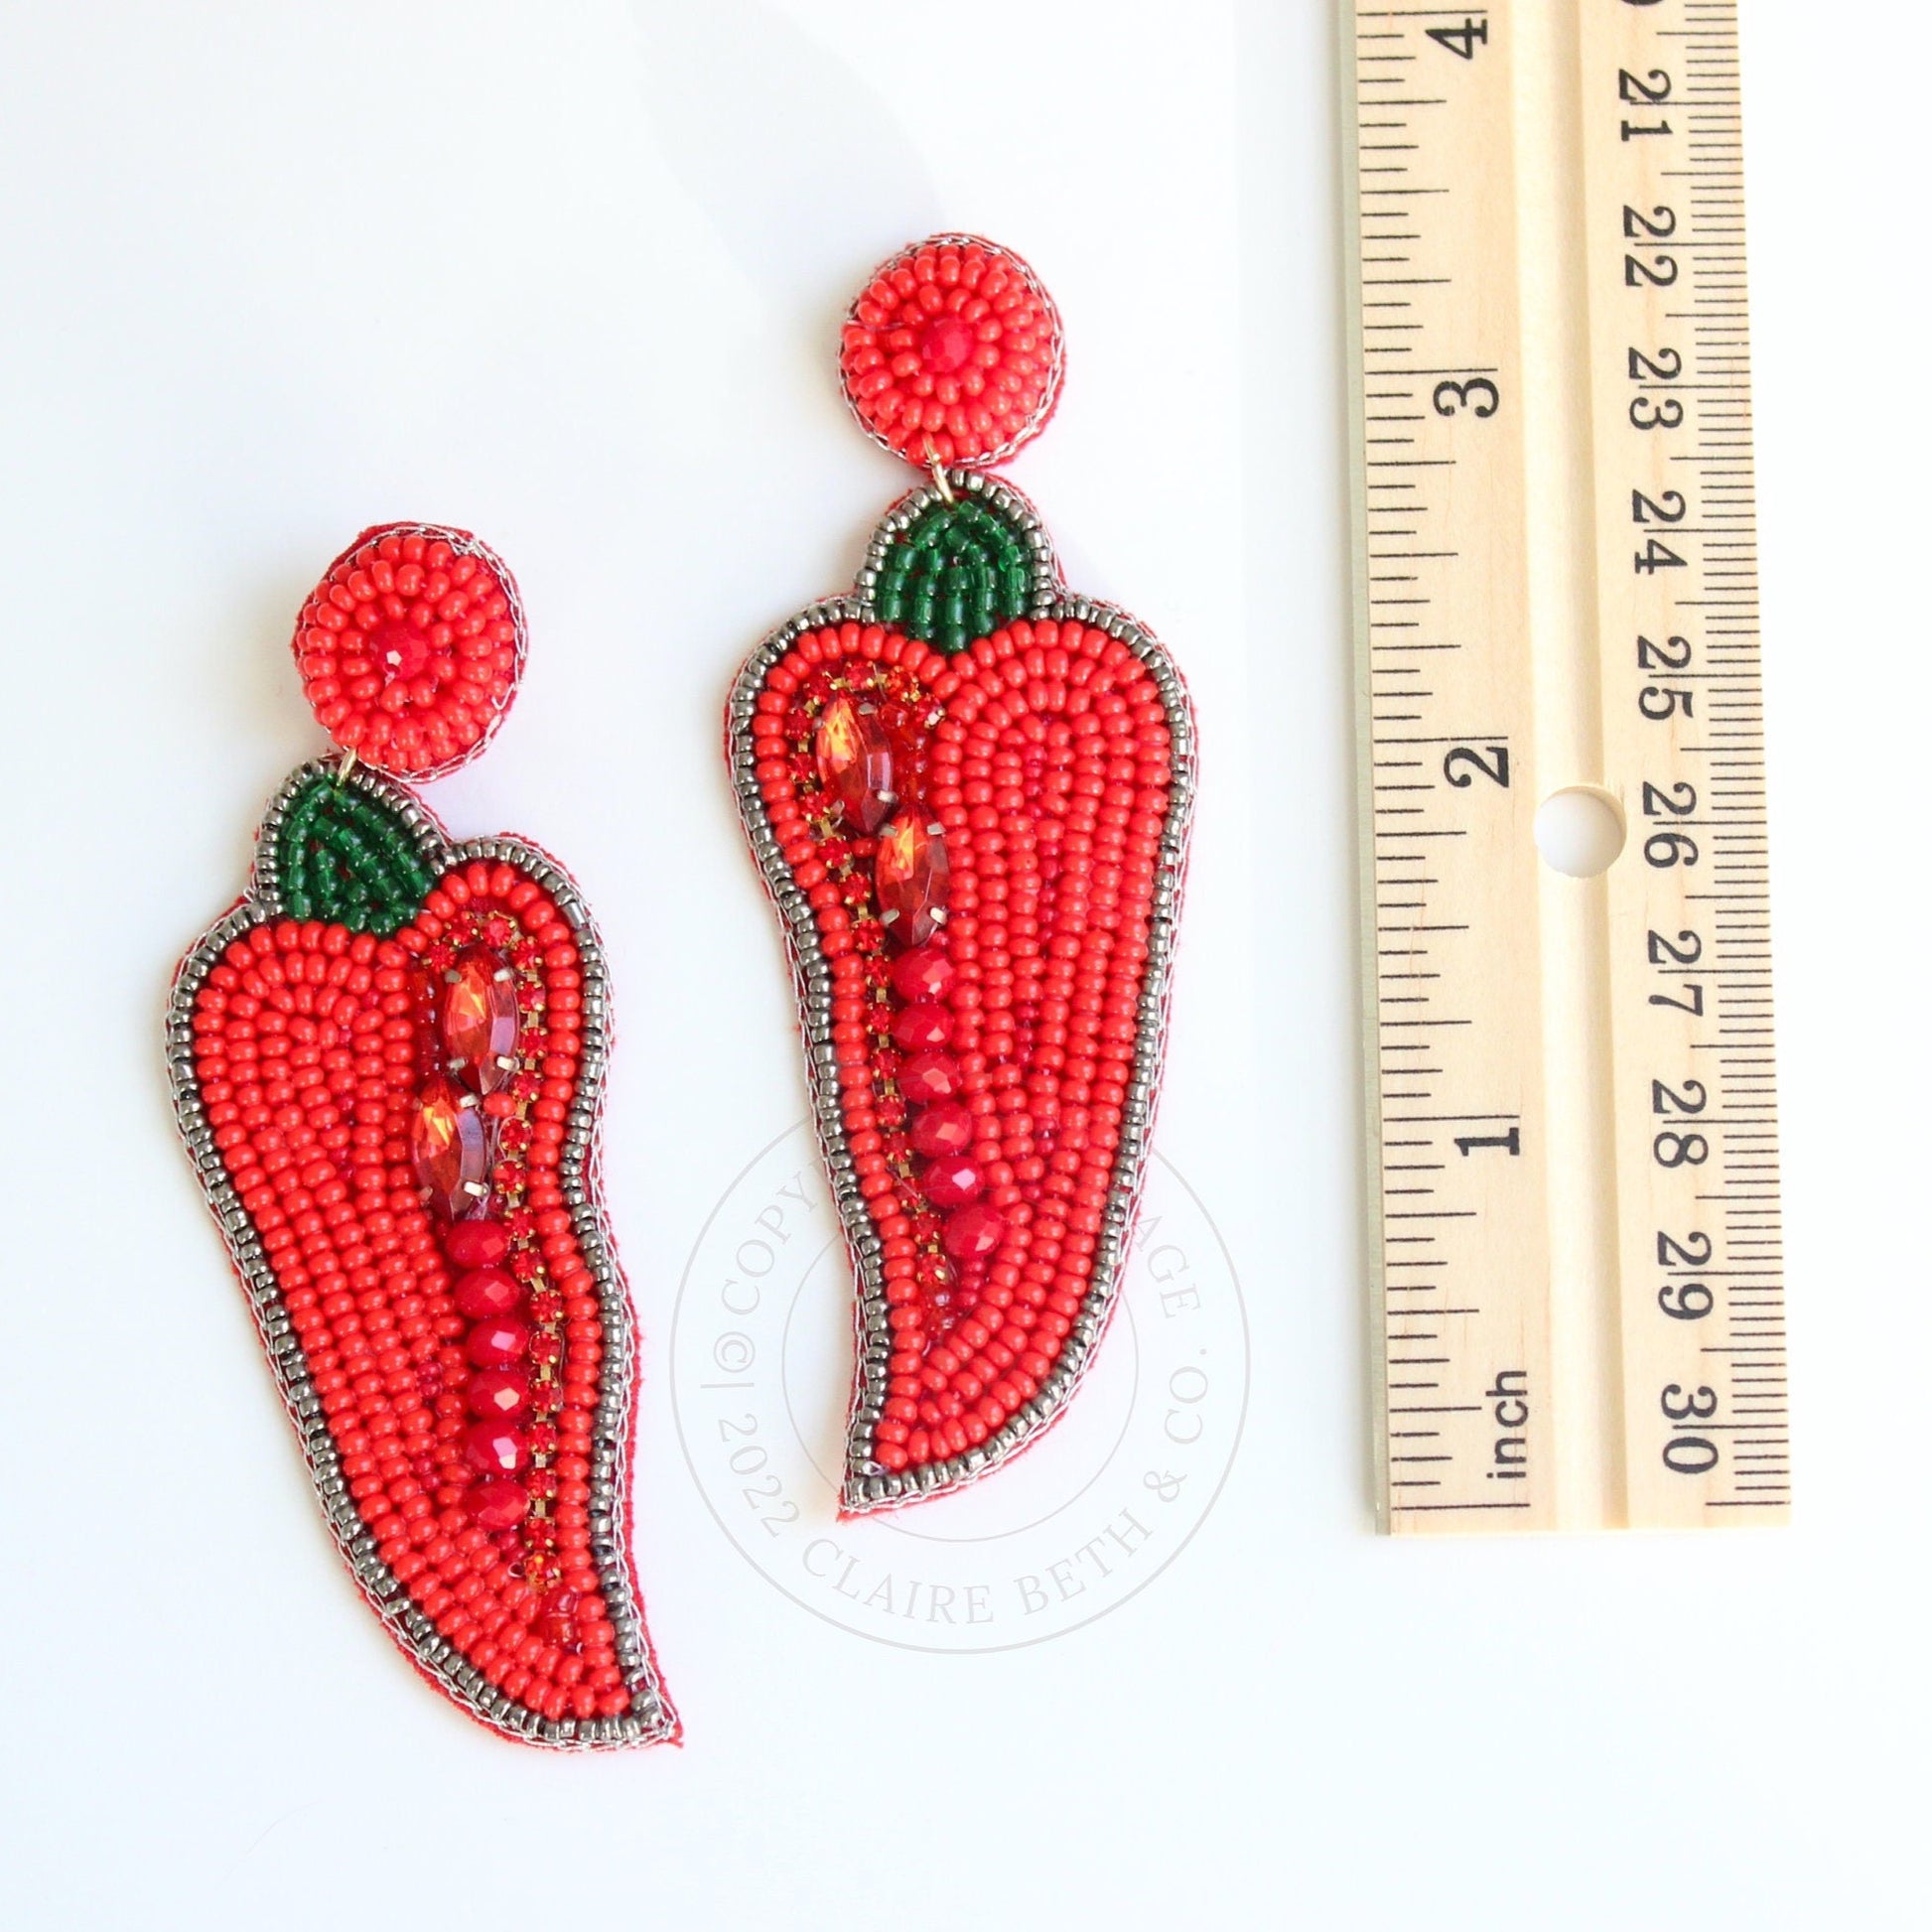 chili pepper beaded earrings next to ruler showing just over 3 inches in length